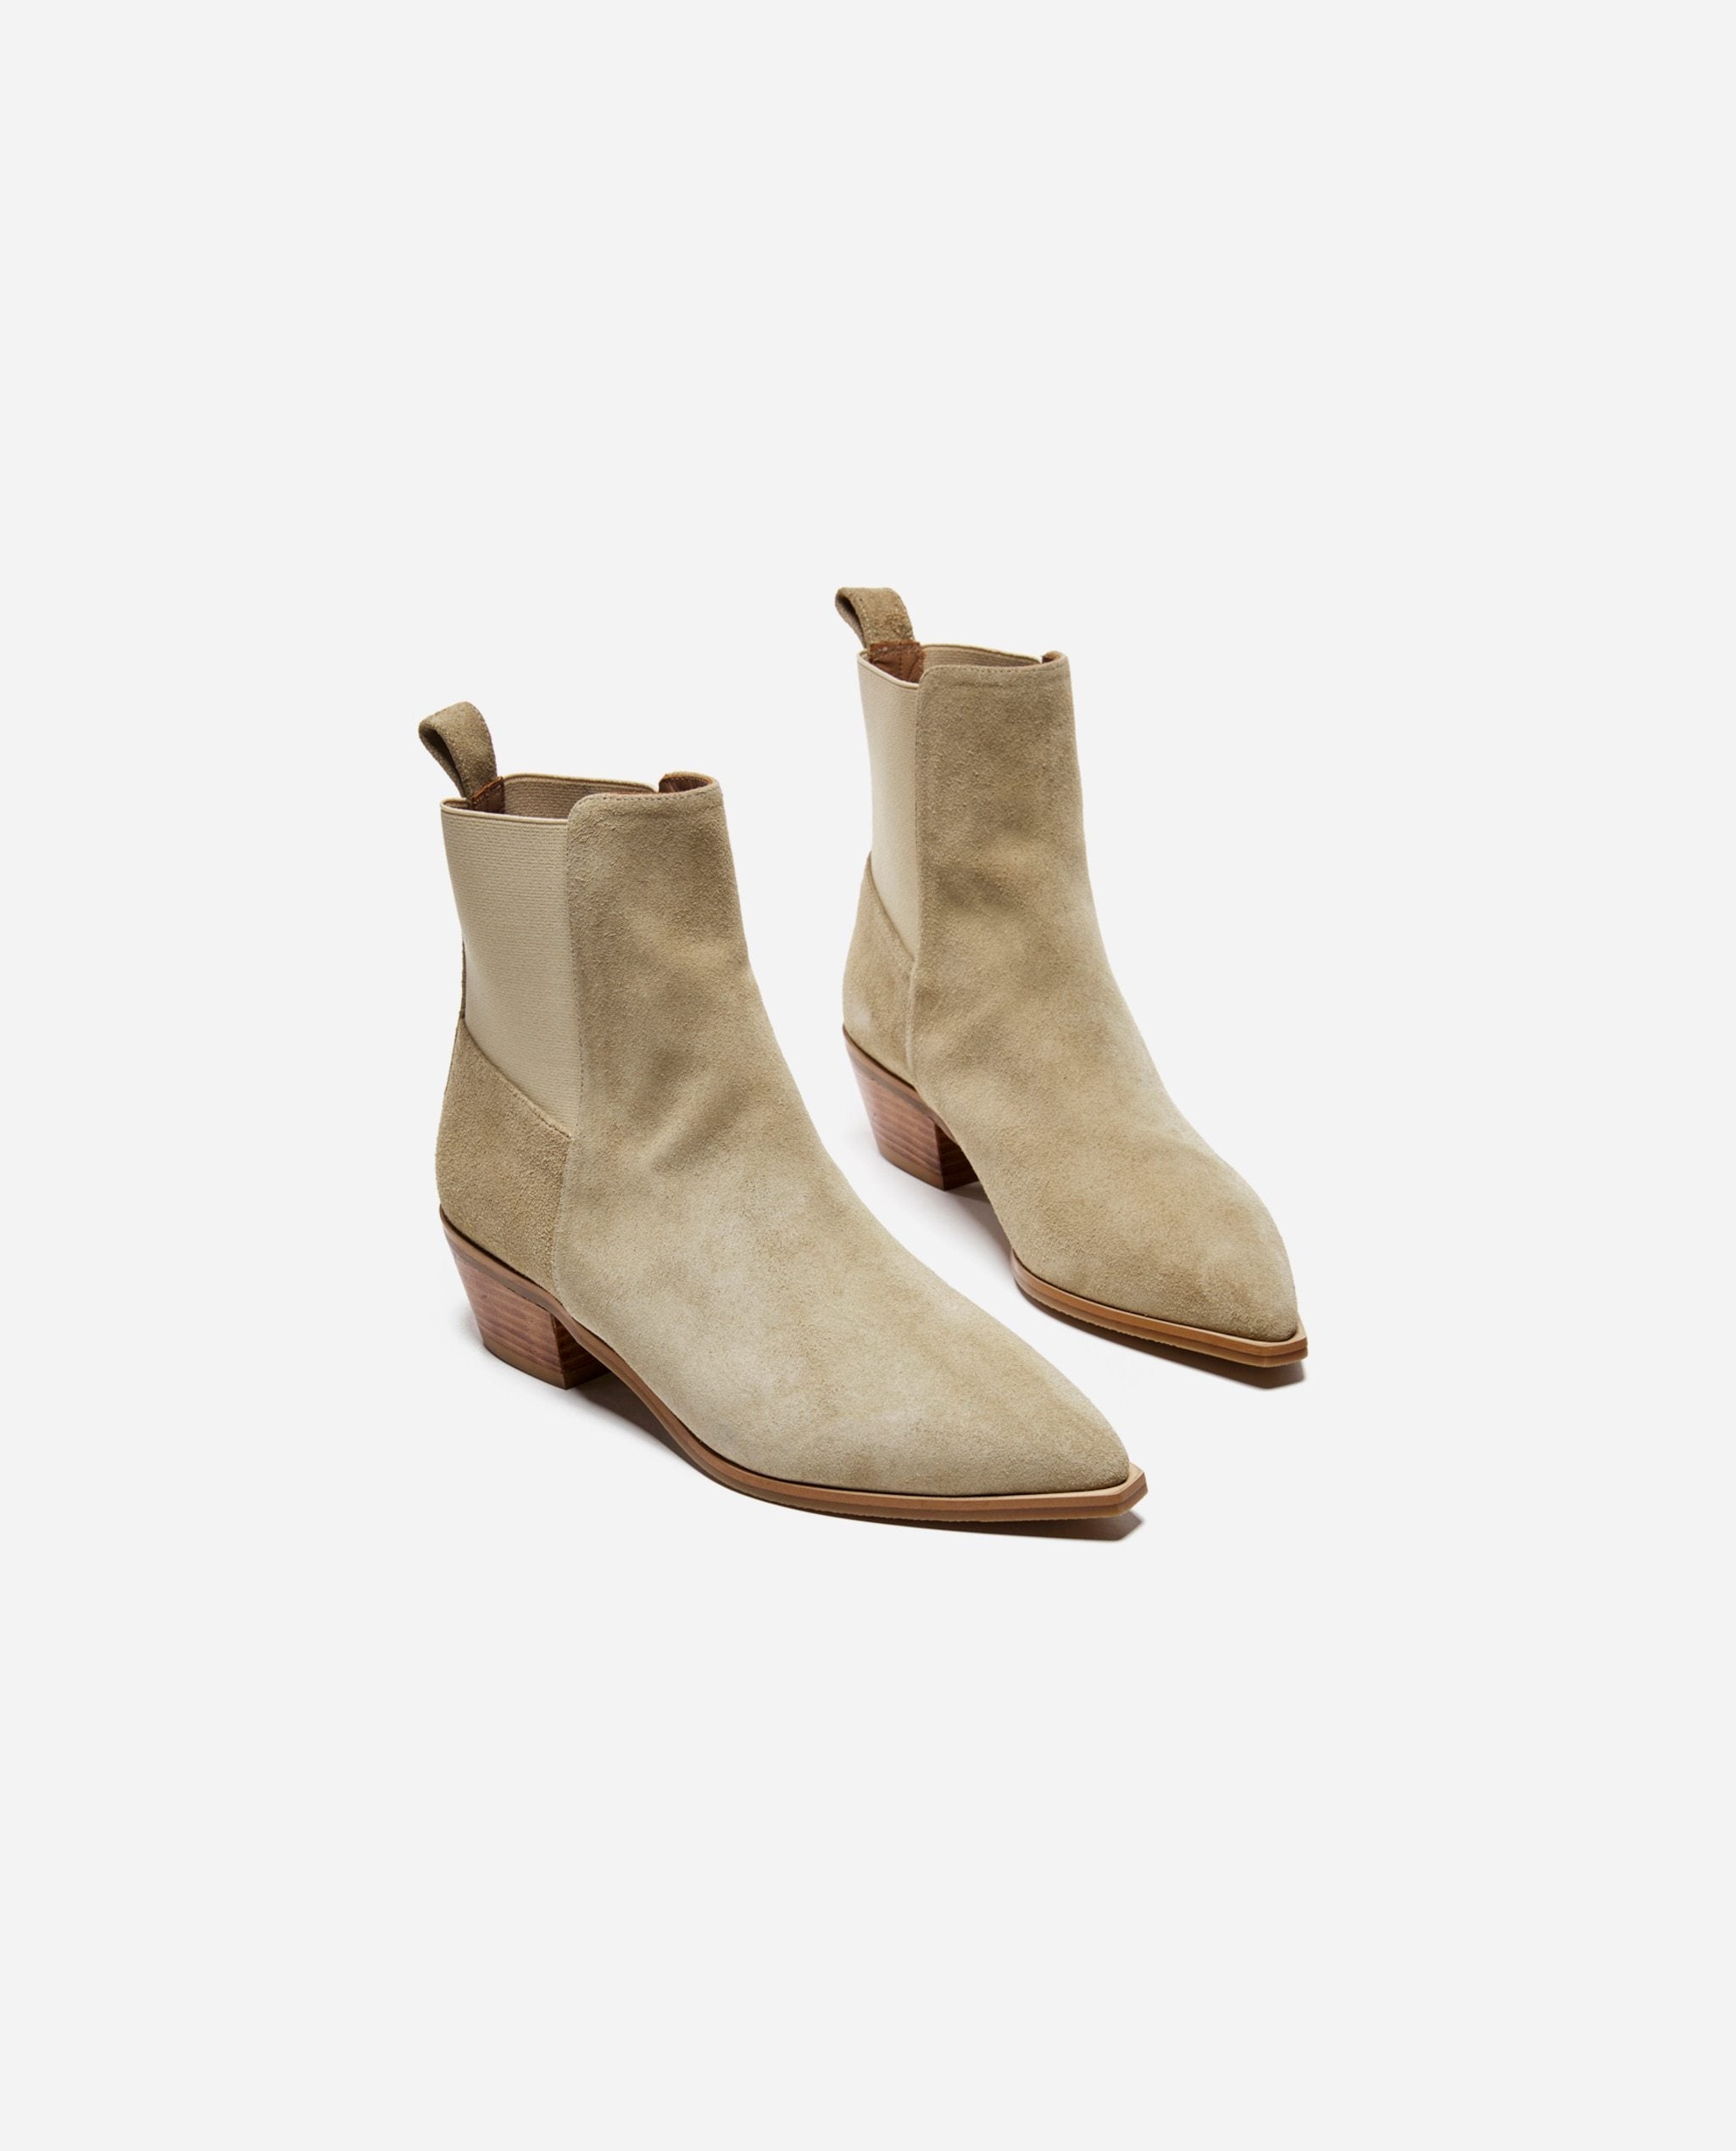 Willow Suede Sand Boots 21010814703-022 - 2